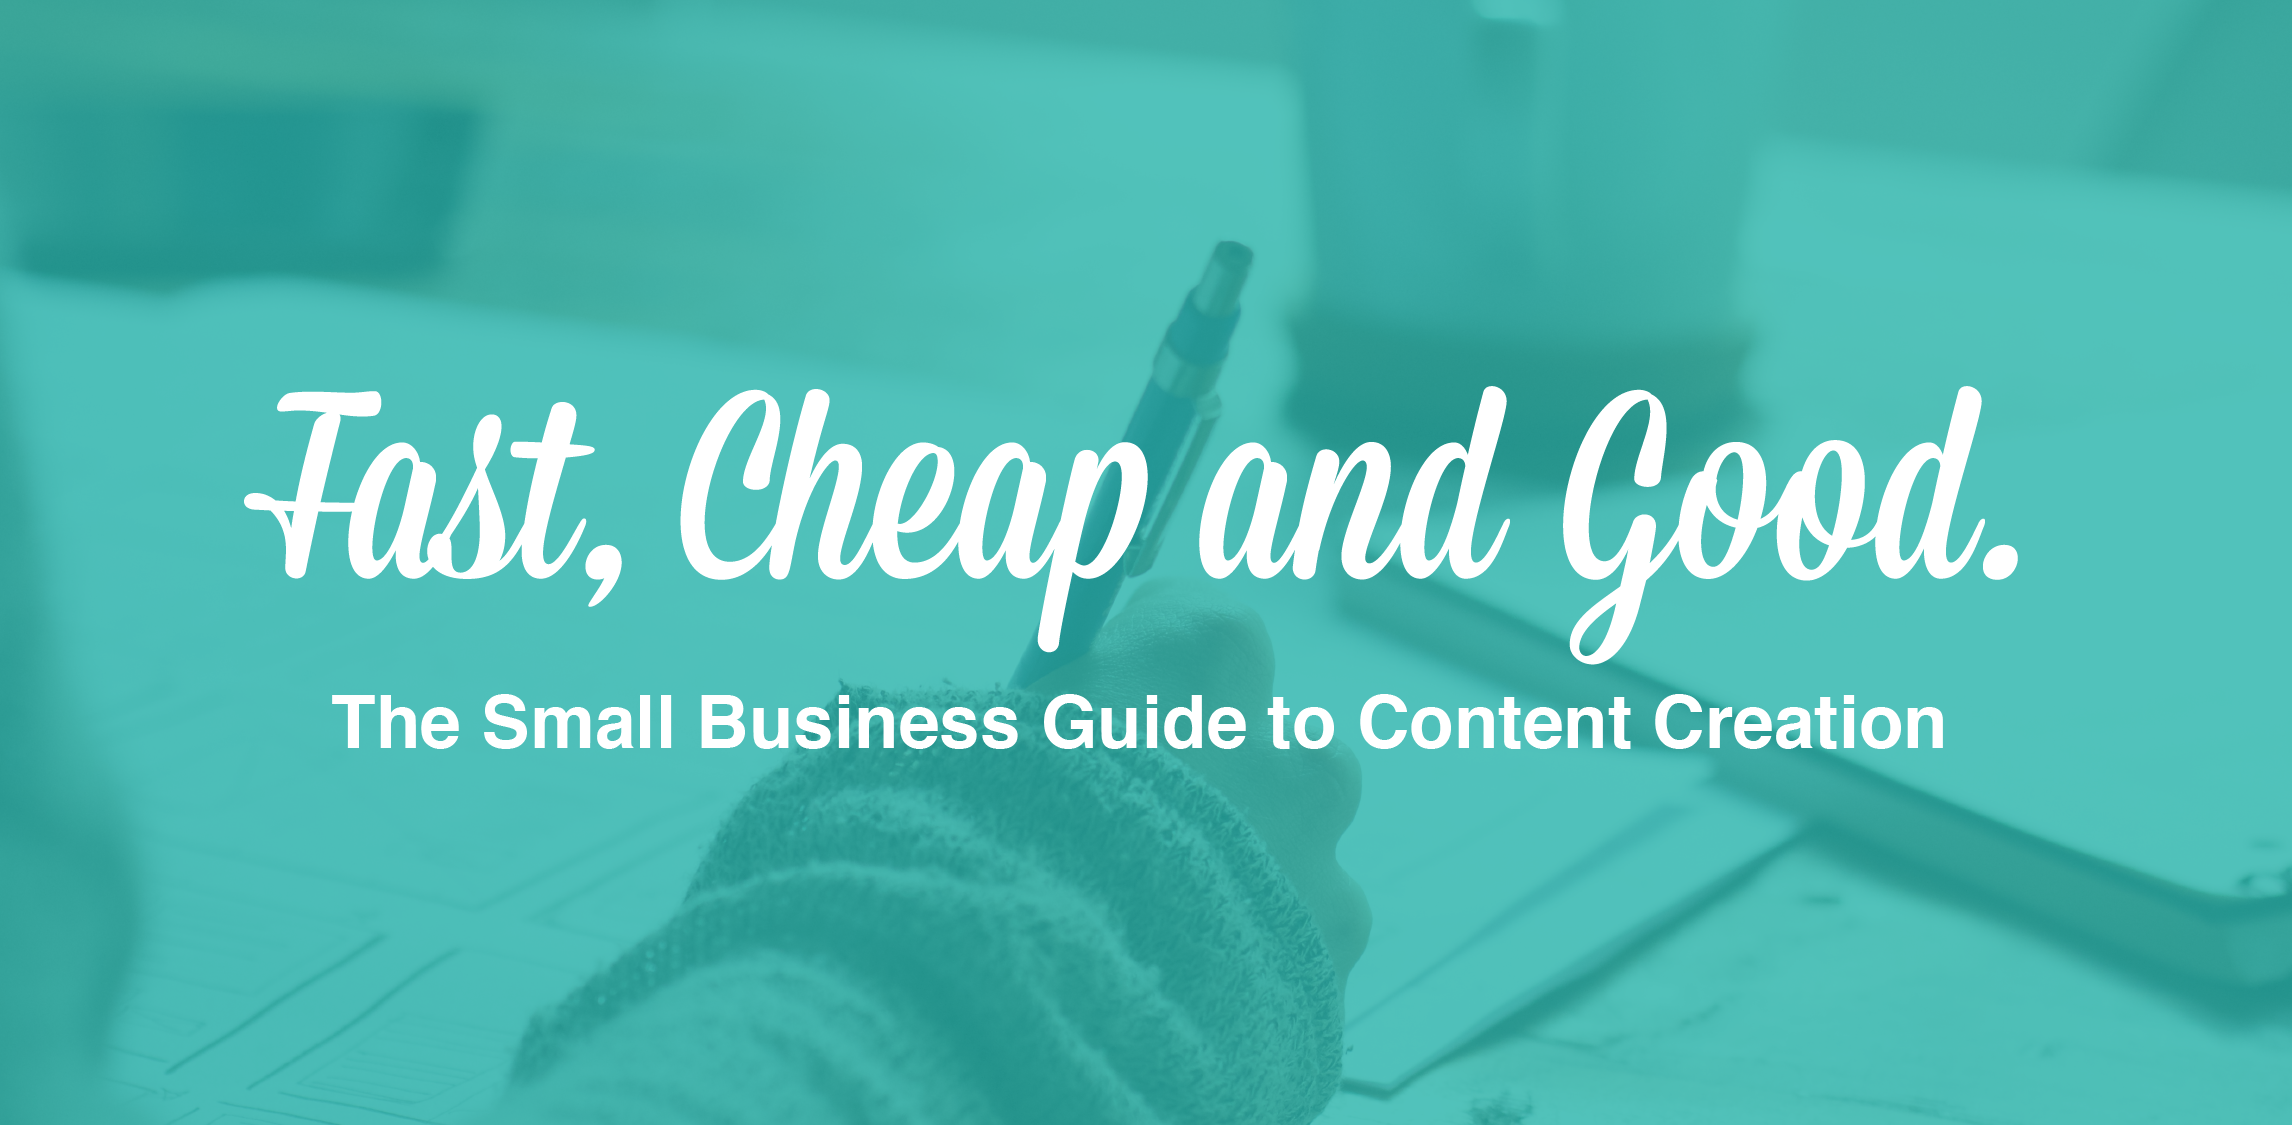 Fast, Cheap, and Good: The Small Business Guide to Content Creation